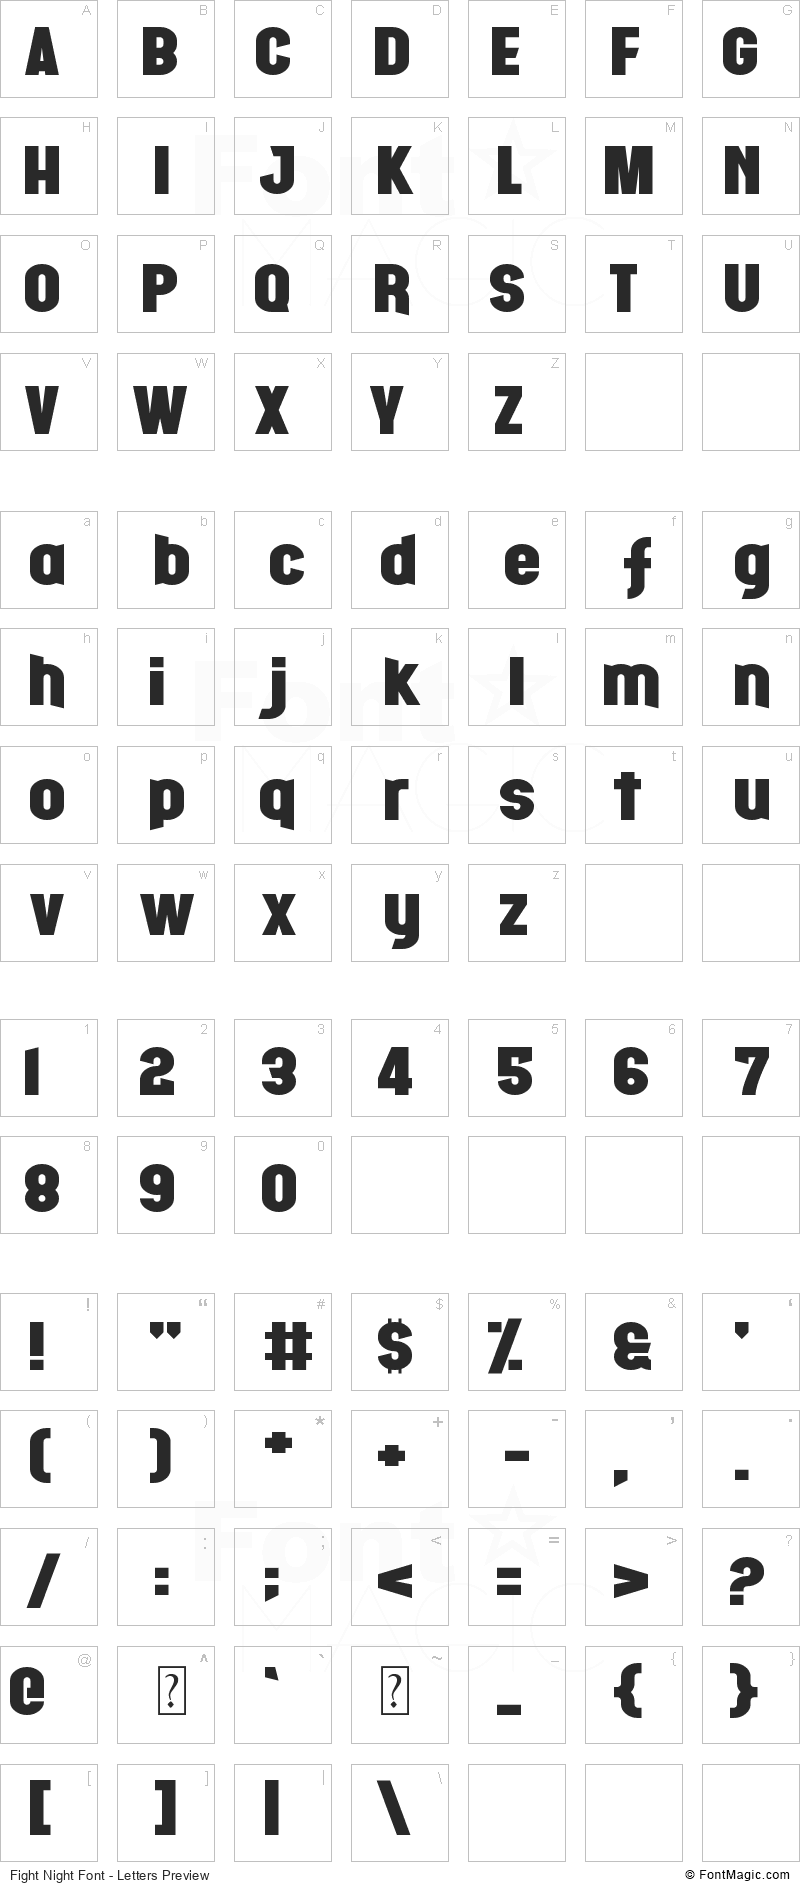 Fight Night Font - All Latters Preview Chart